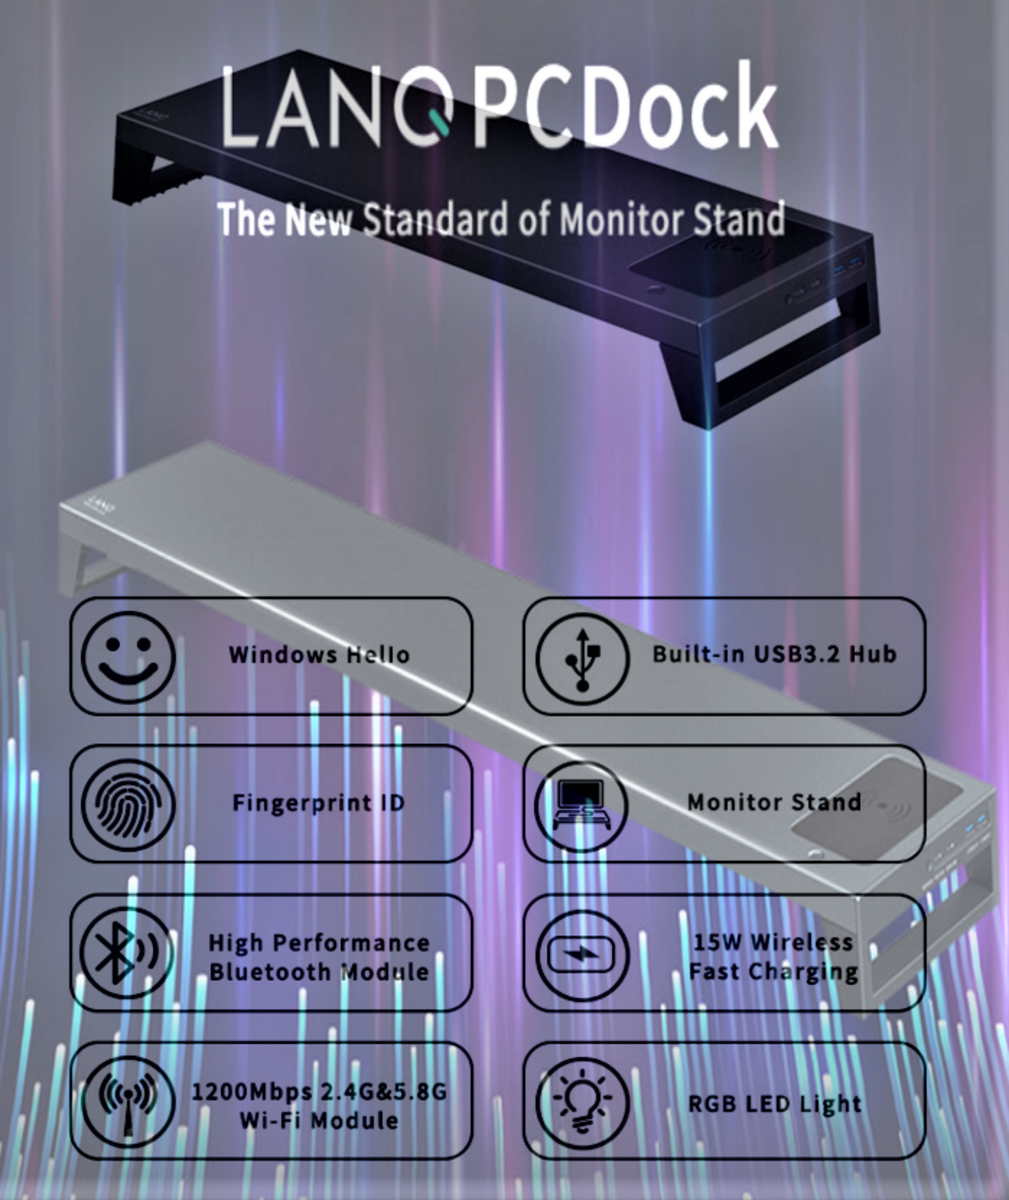 Lanq PCDock: The Ultimate Desktop Monitor Stand & PC Accessory